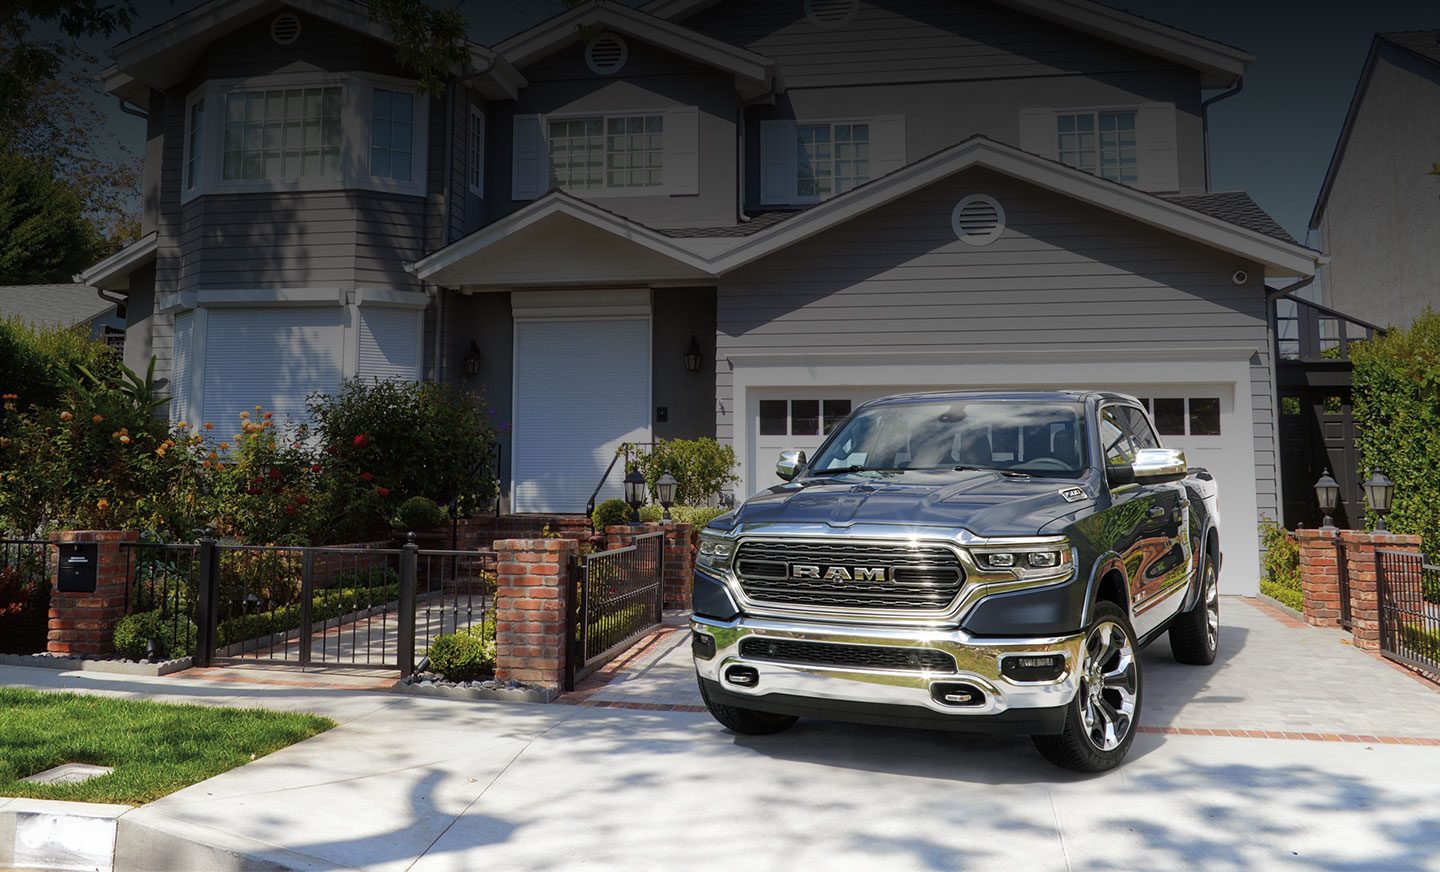 The 2020 Ram 1500 parked in the driveway of a neighborhood home.